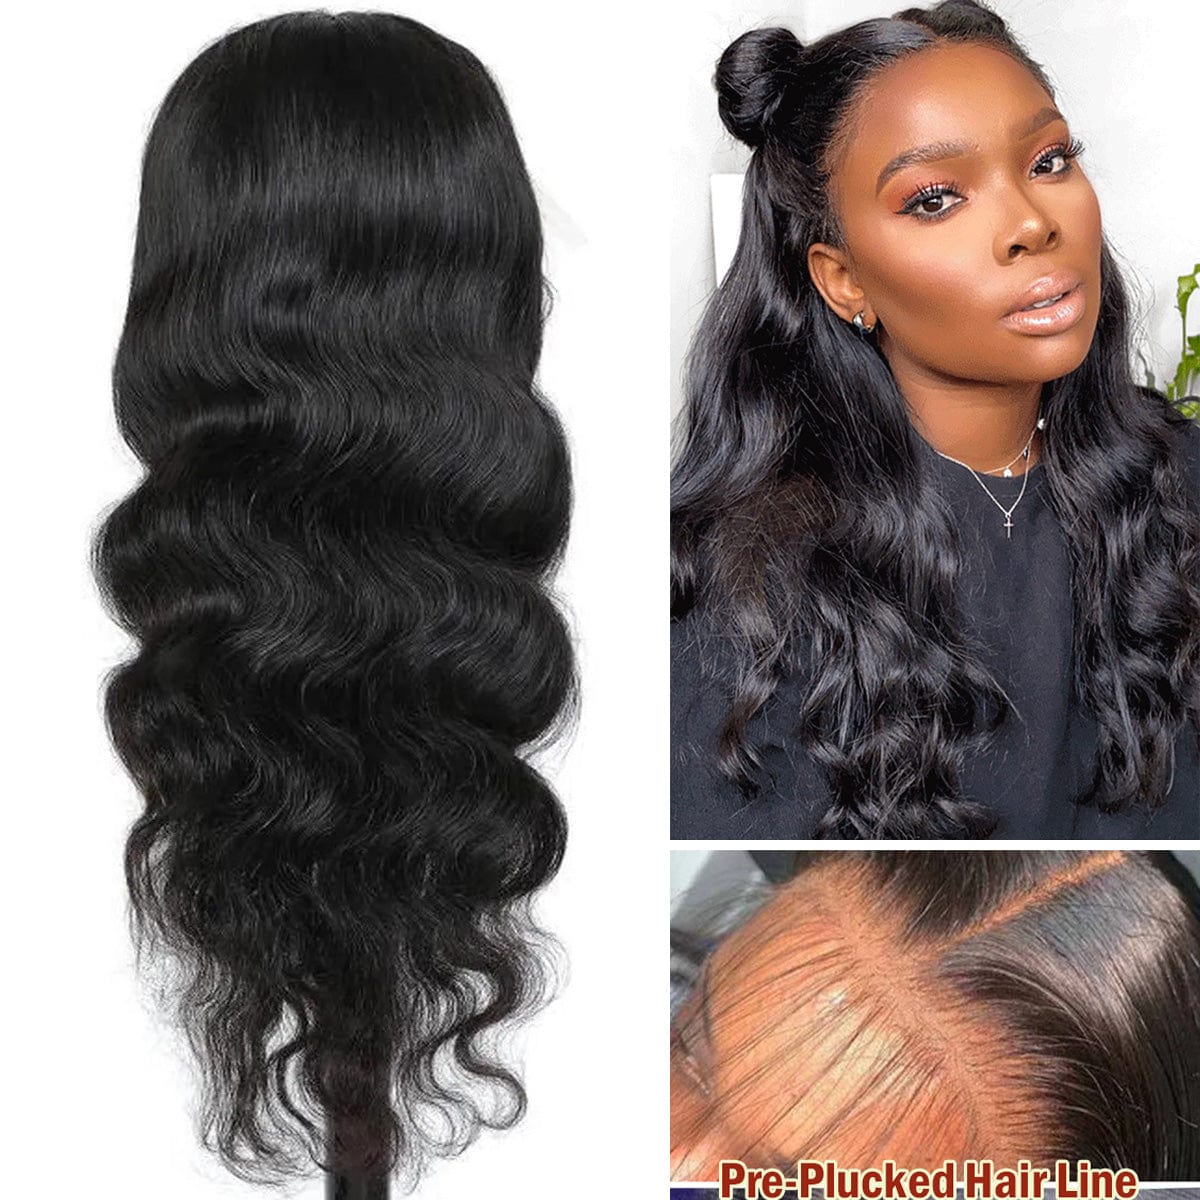 Queen Hair Inc 13x4 Body Wave Lace Frontal Human Hair Wigs 150% 180% Density #1B Natural Color